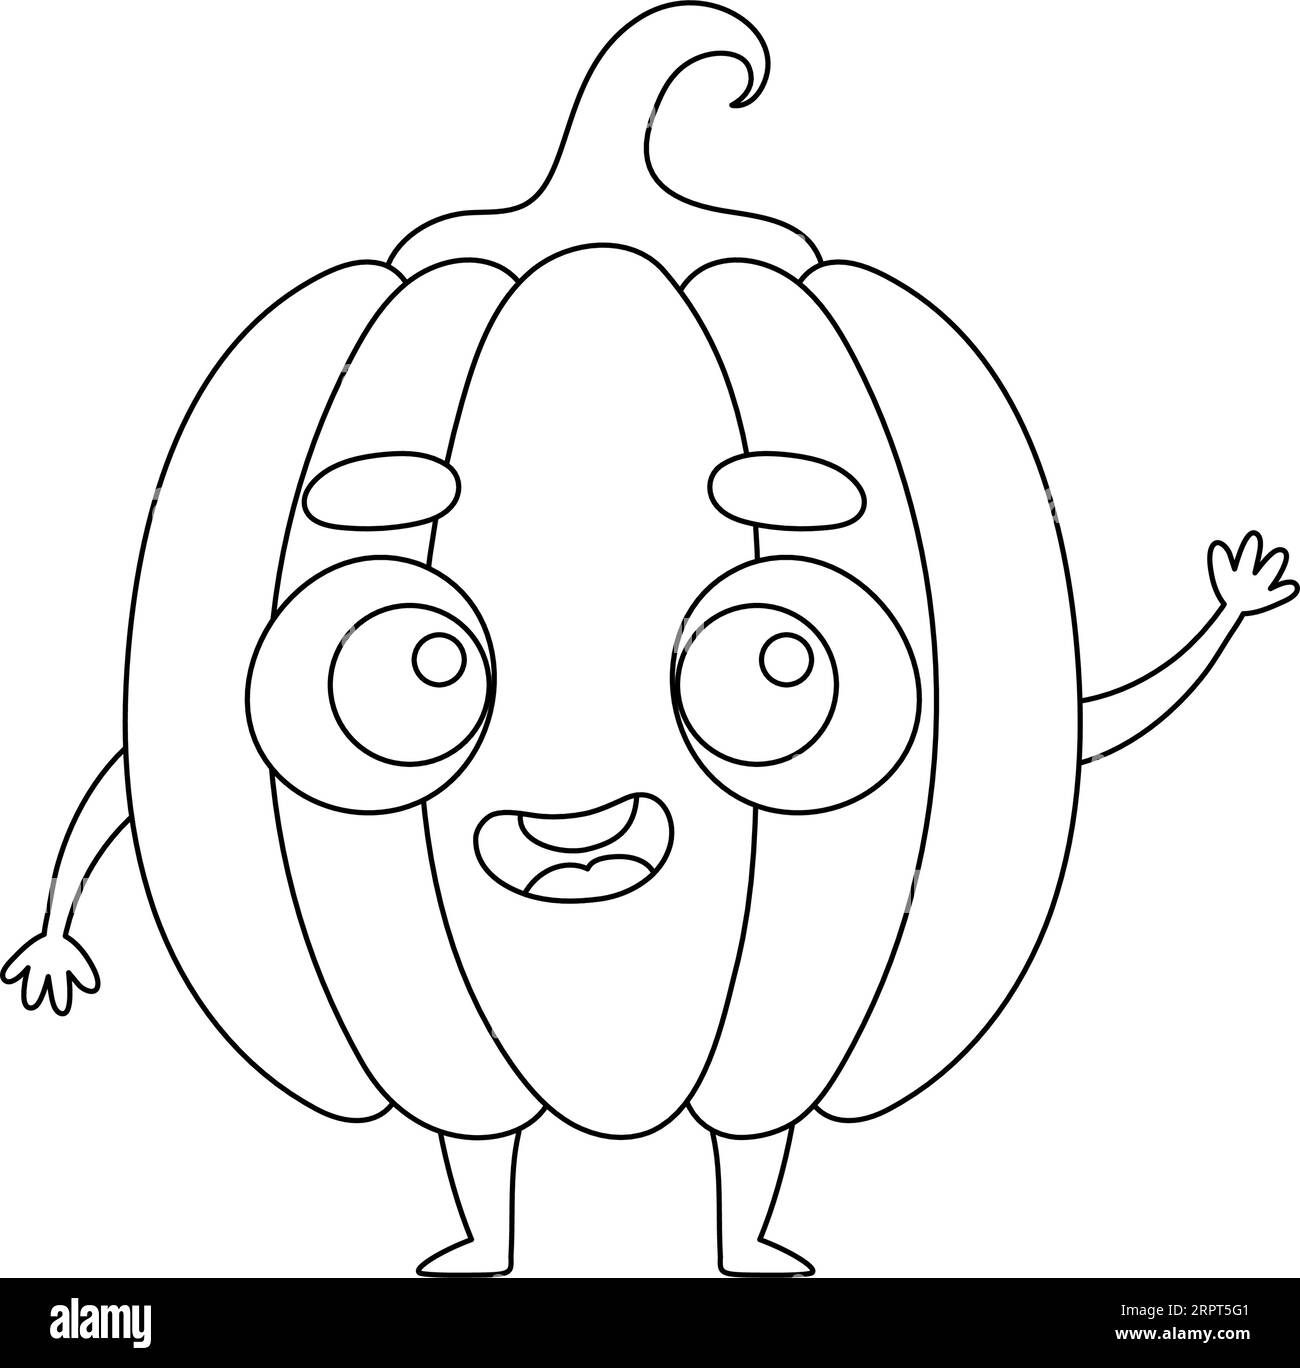 Coloring page funny pumpkin coloring book for kids educational activity for preschool years kids and toddlers with cute animal vector illustration stock vector image art